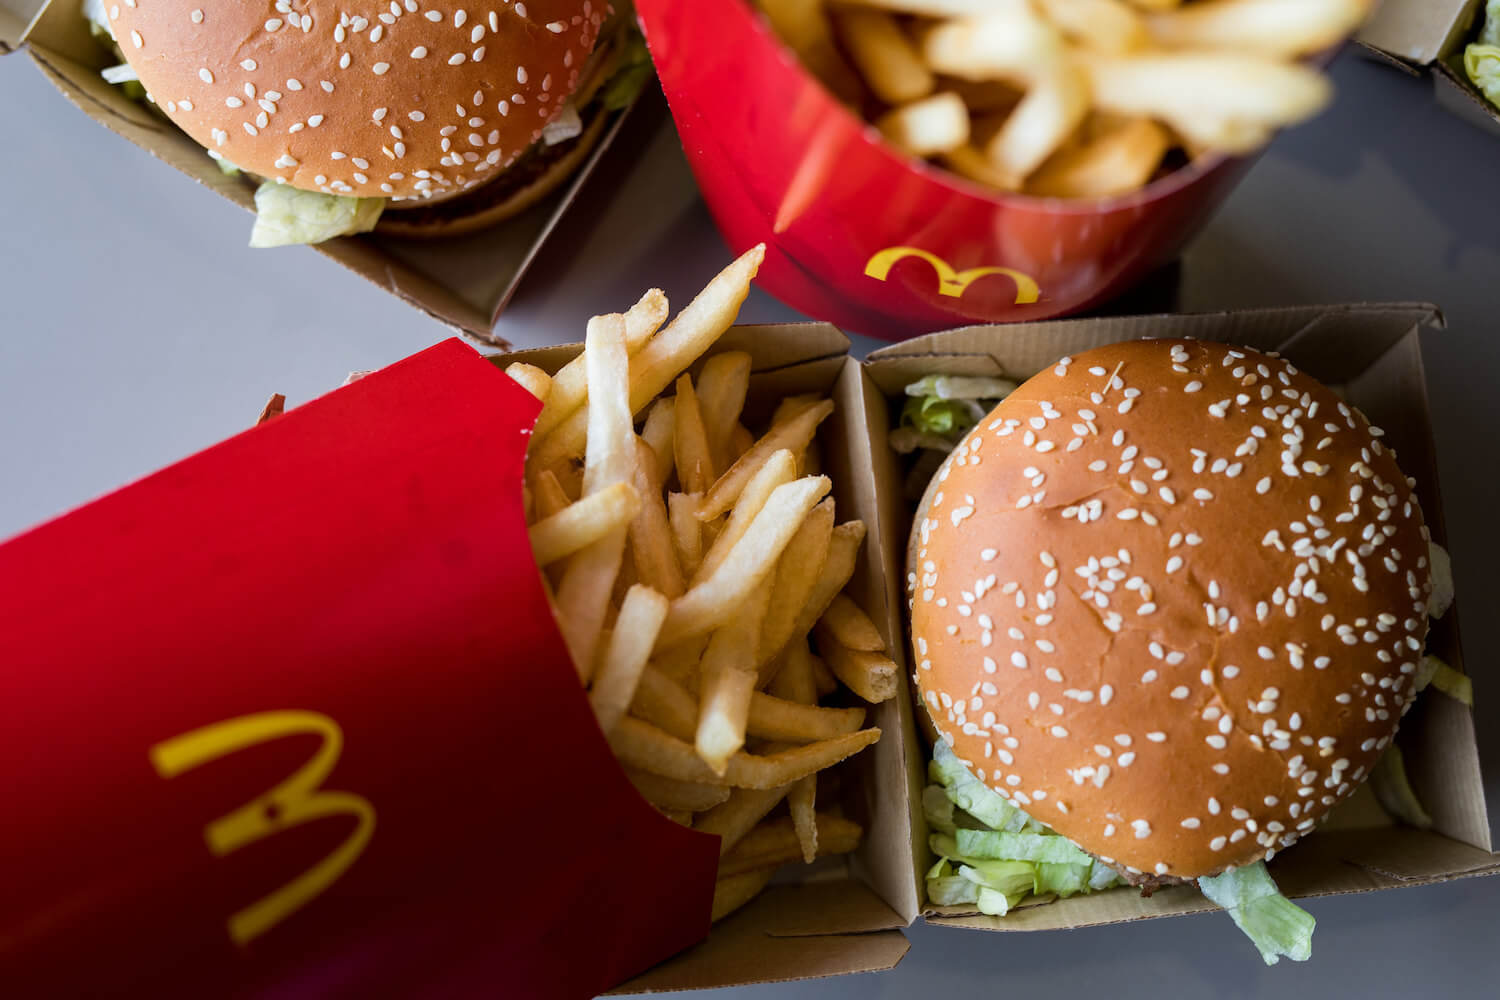 Overview shot of McDonald's fries and a Big Mac burger in their paper packaging. August 2020